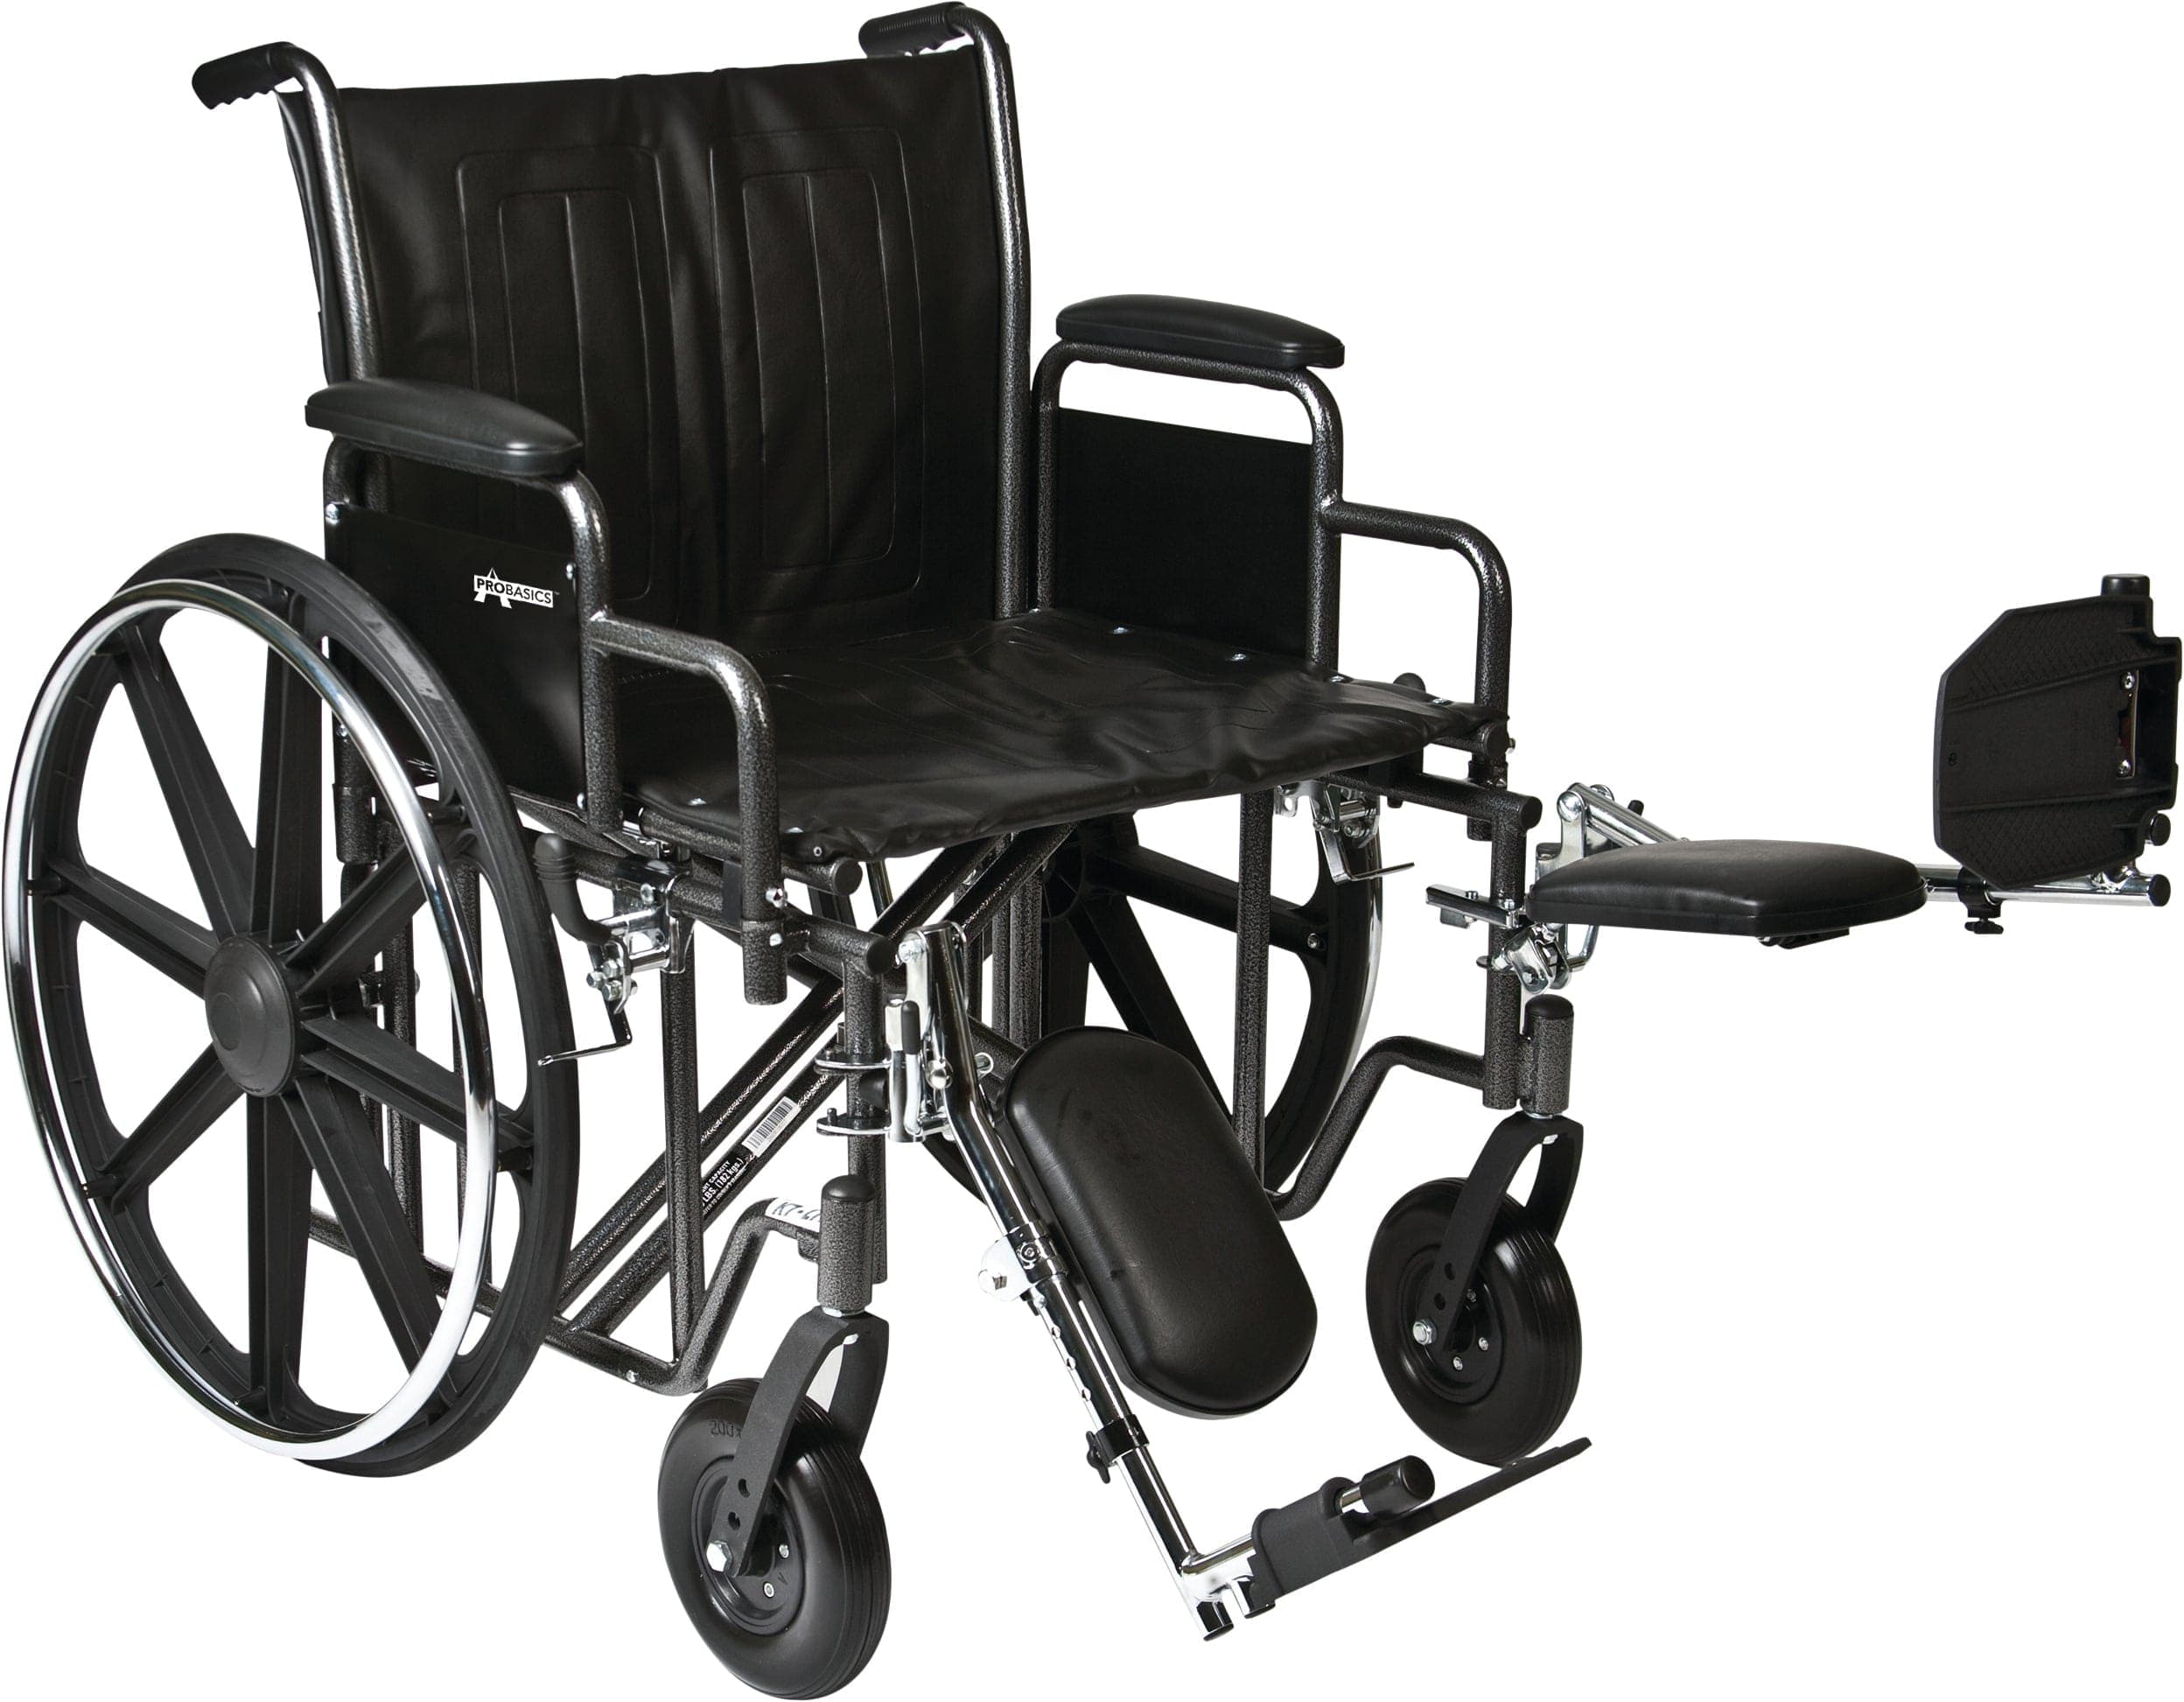 Compass Health K7 Wheelchairs Compass Health ProBasics Heavy Duty K0007 Wheelchair, 28" x 20" Seat with Footrests,